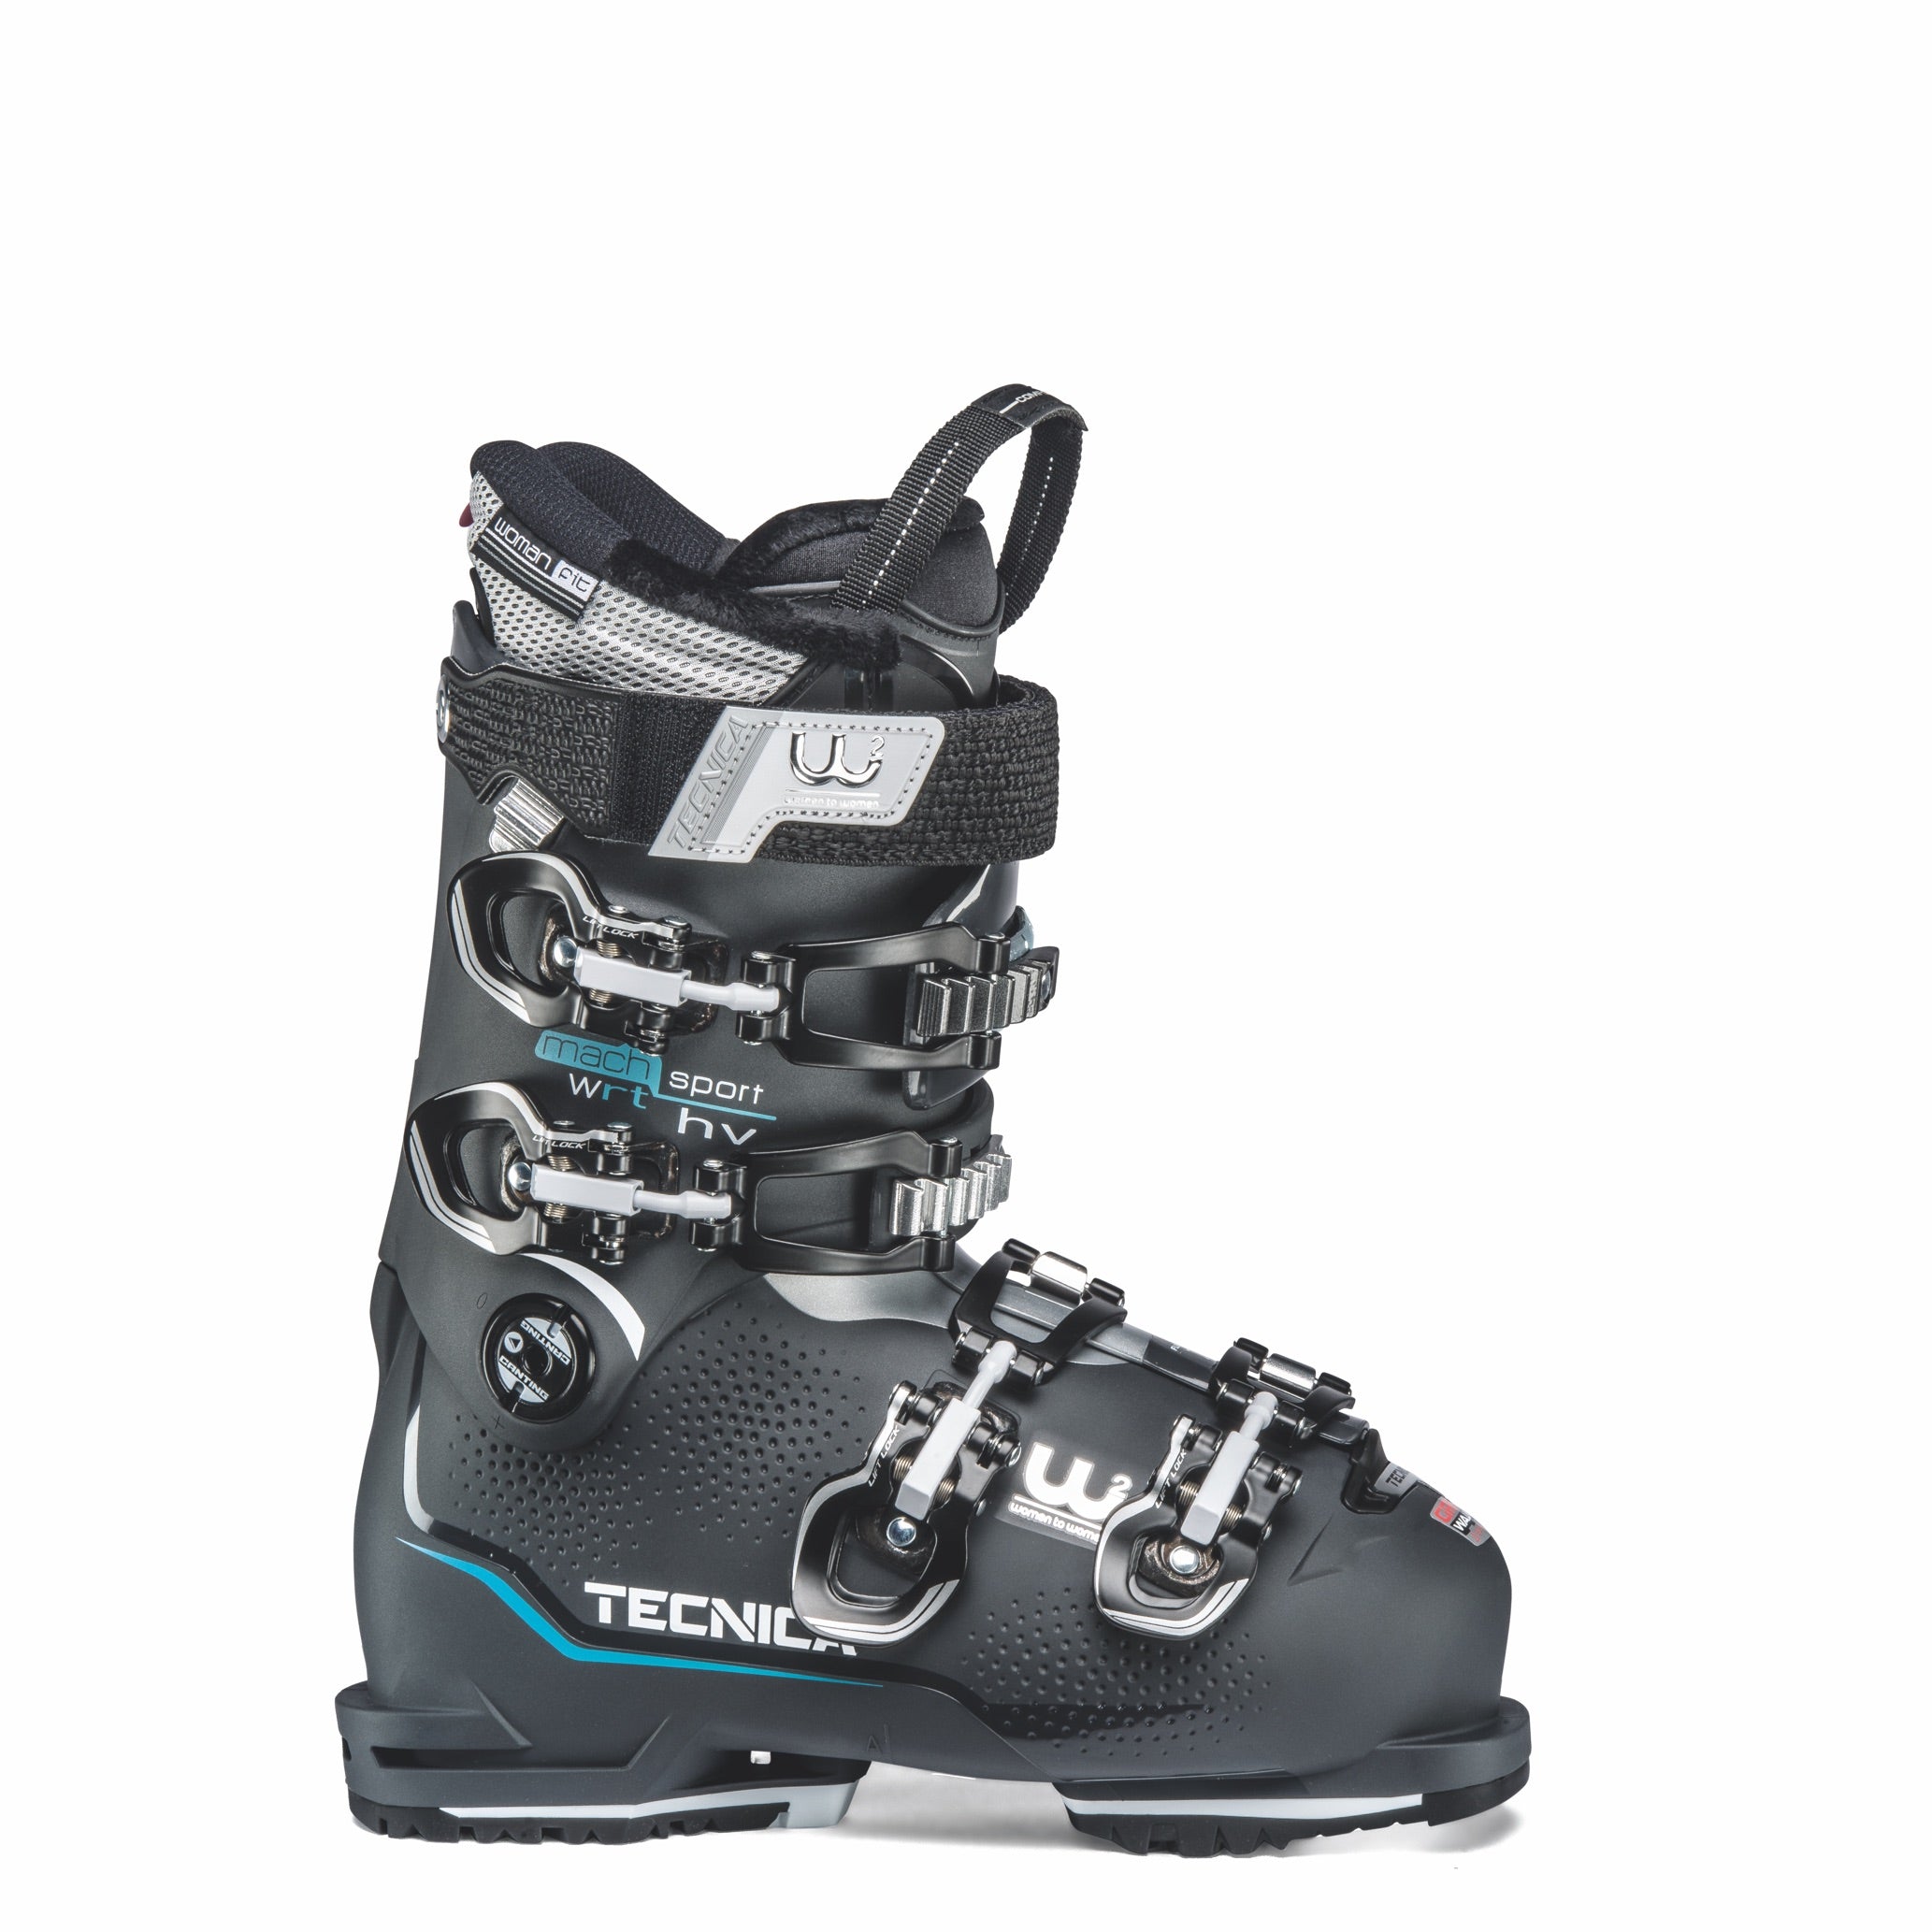 Demo to Purchase - Mount Snow - $70.00